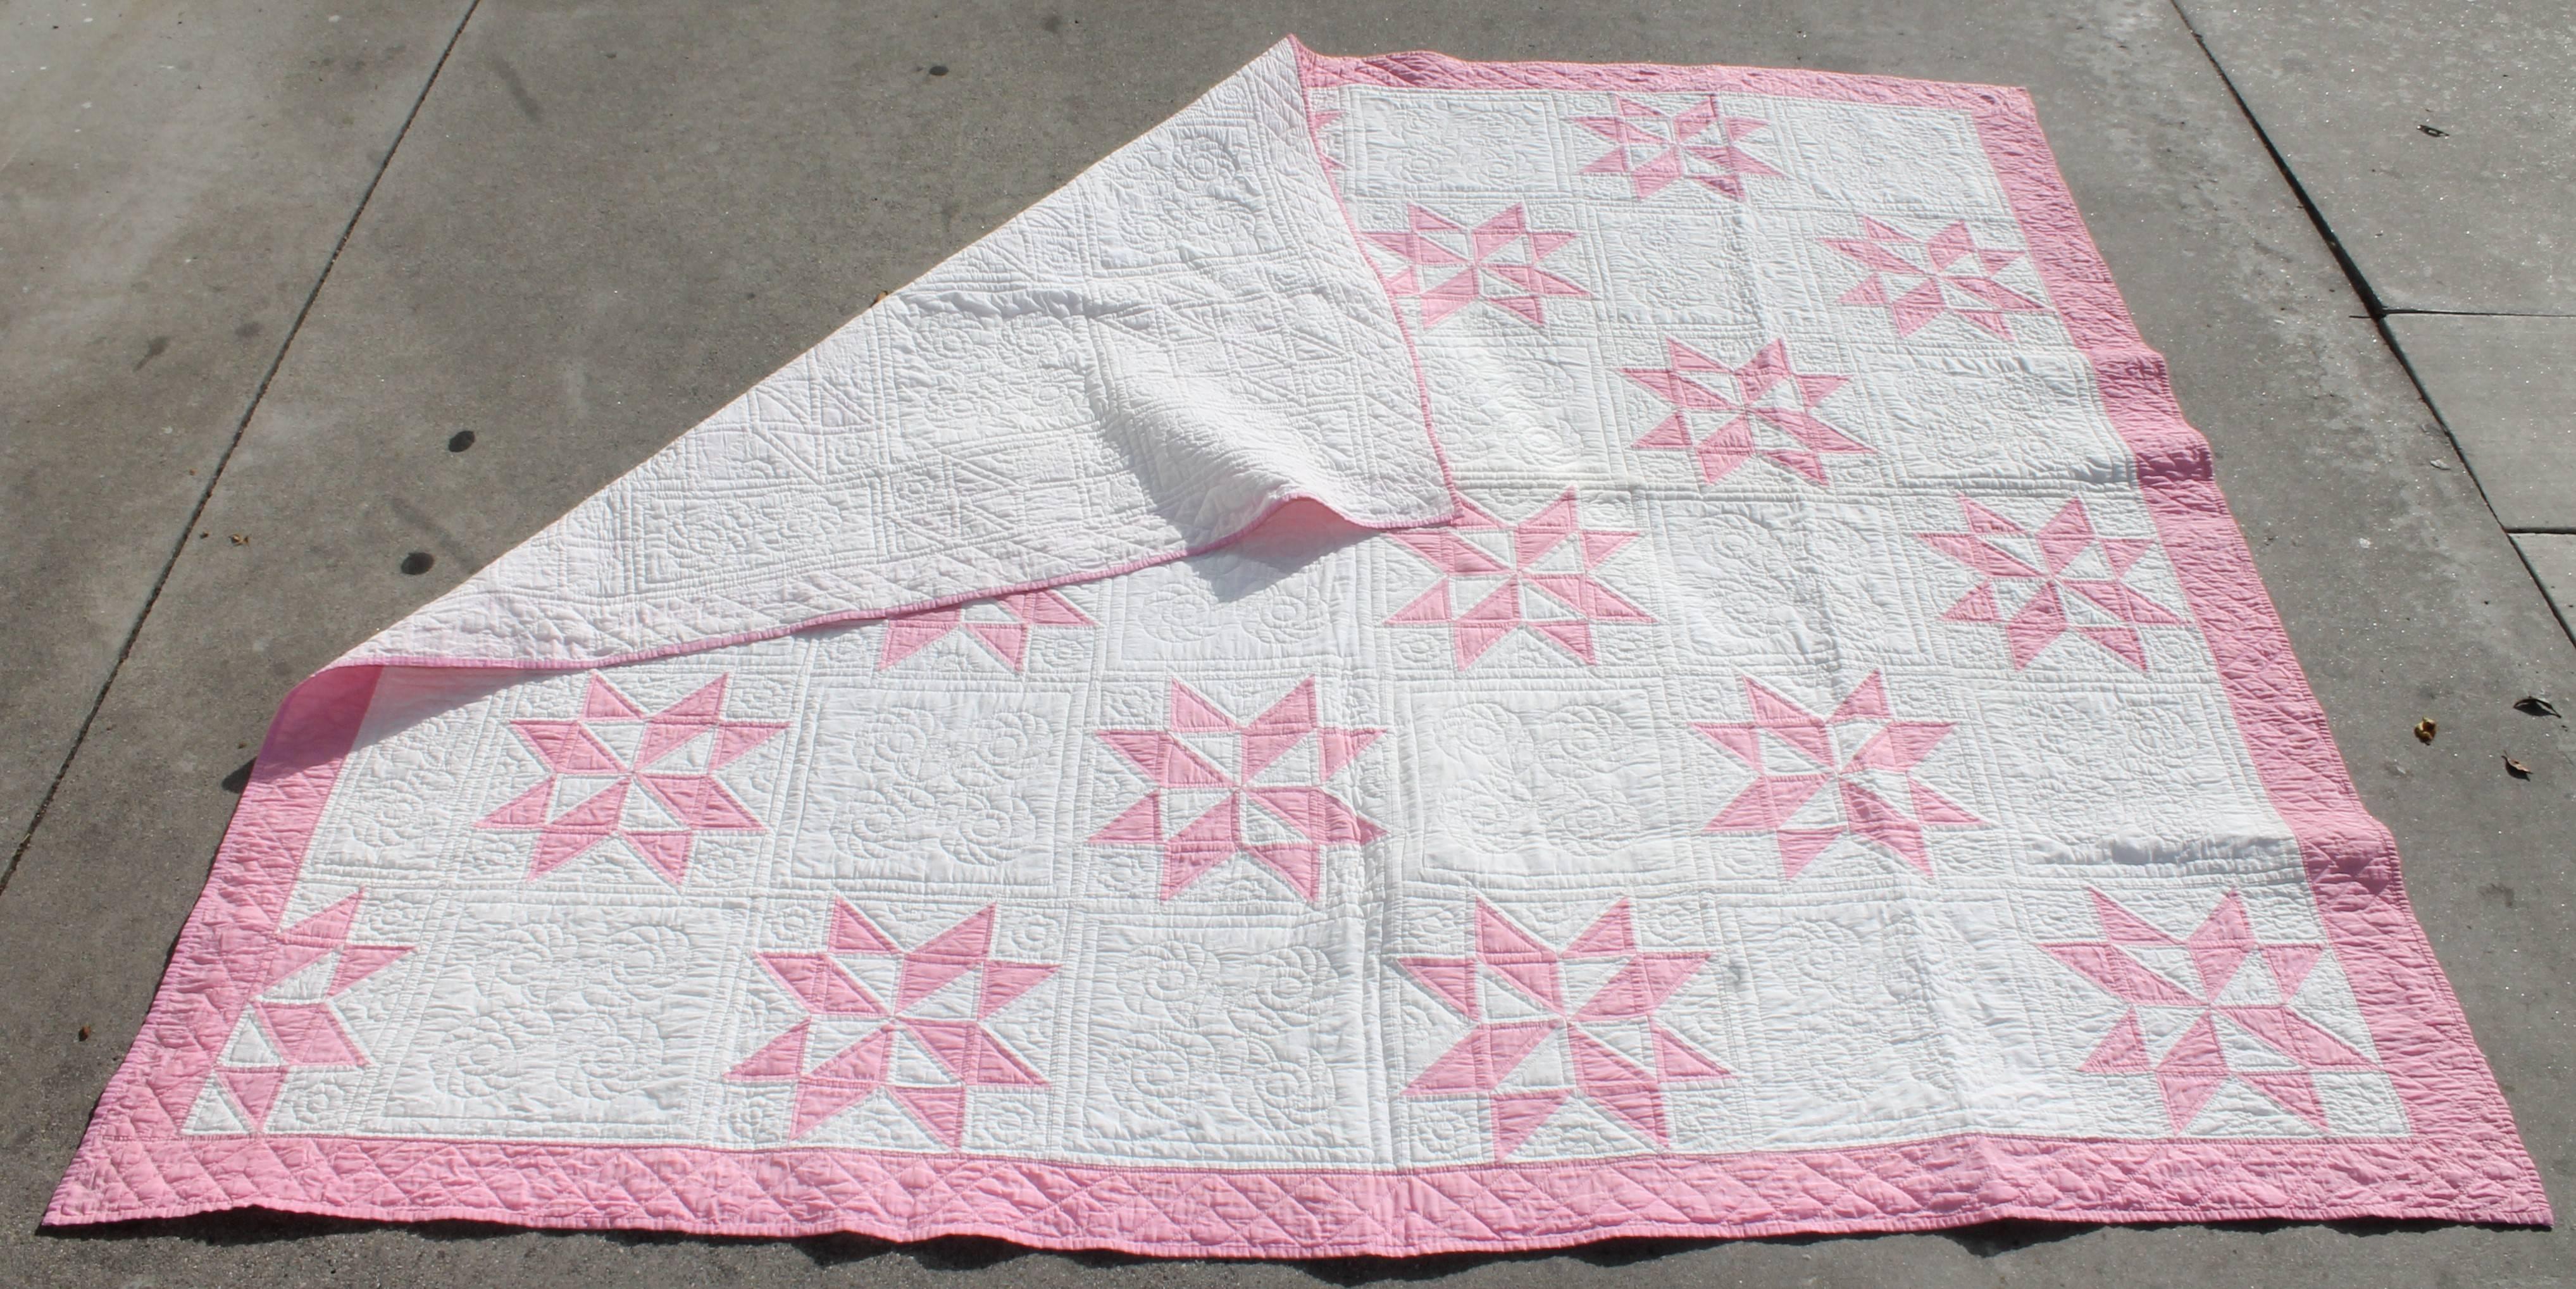 Hand-Crafted 19th Century Star Quilt in Dusty Rose